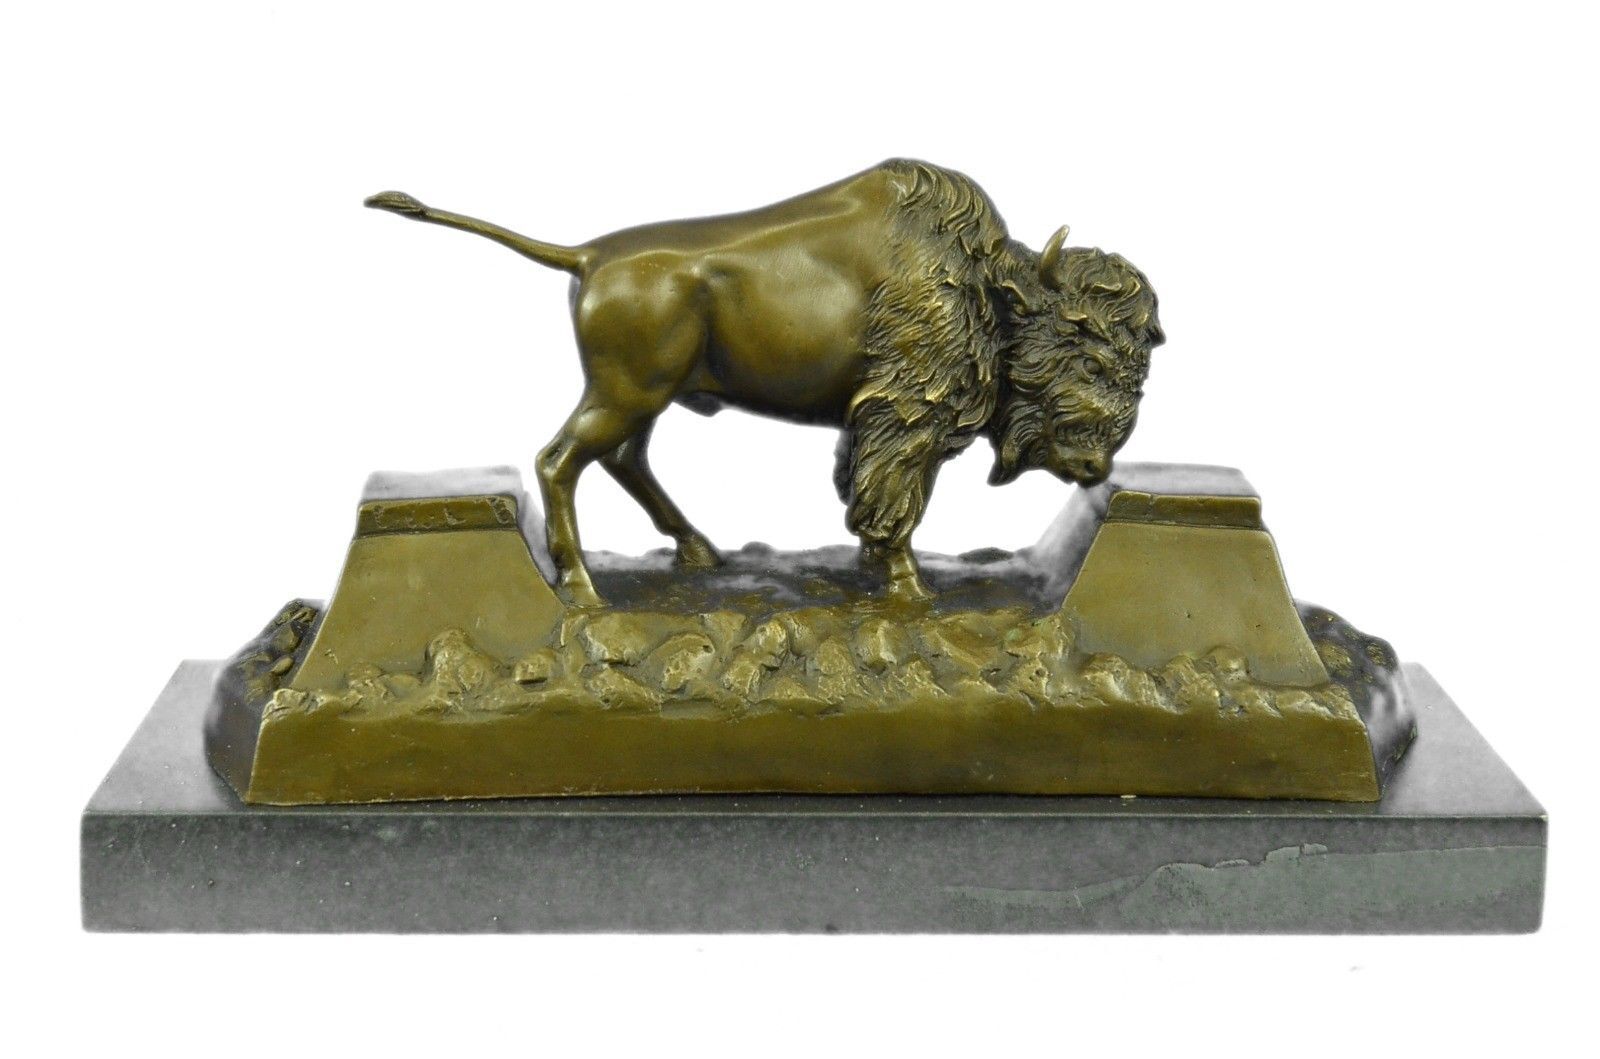 Genuine Bronze Sculpture Large American Buffalo Bison By Russell Hot Cast Deal